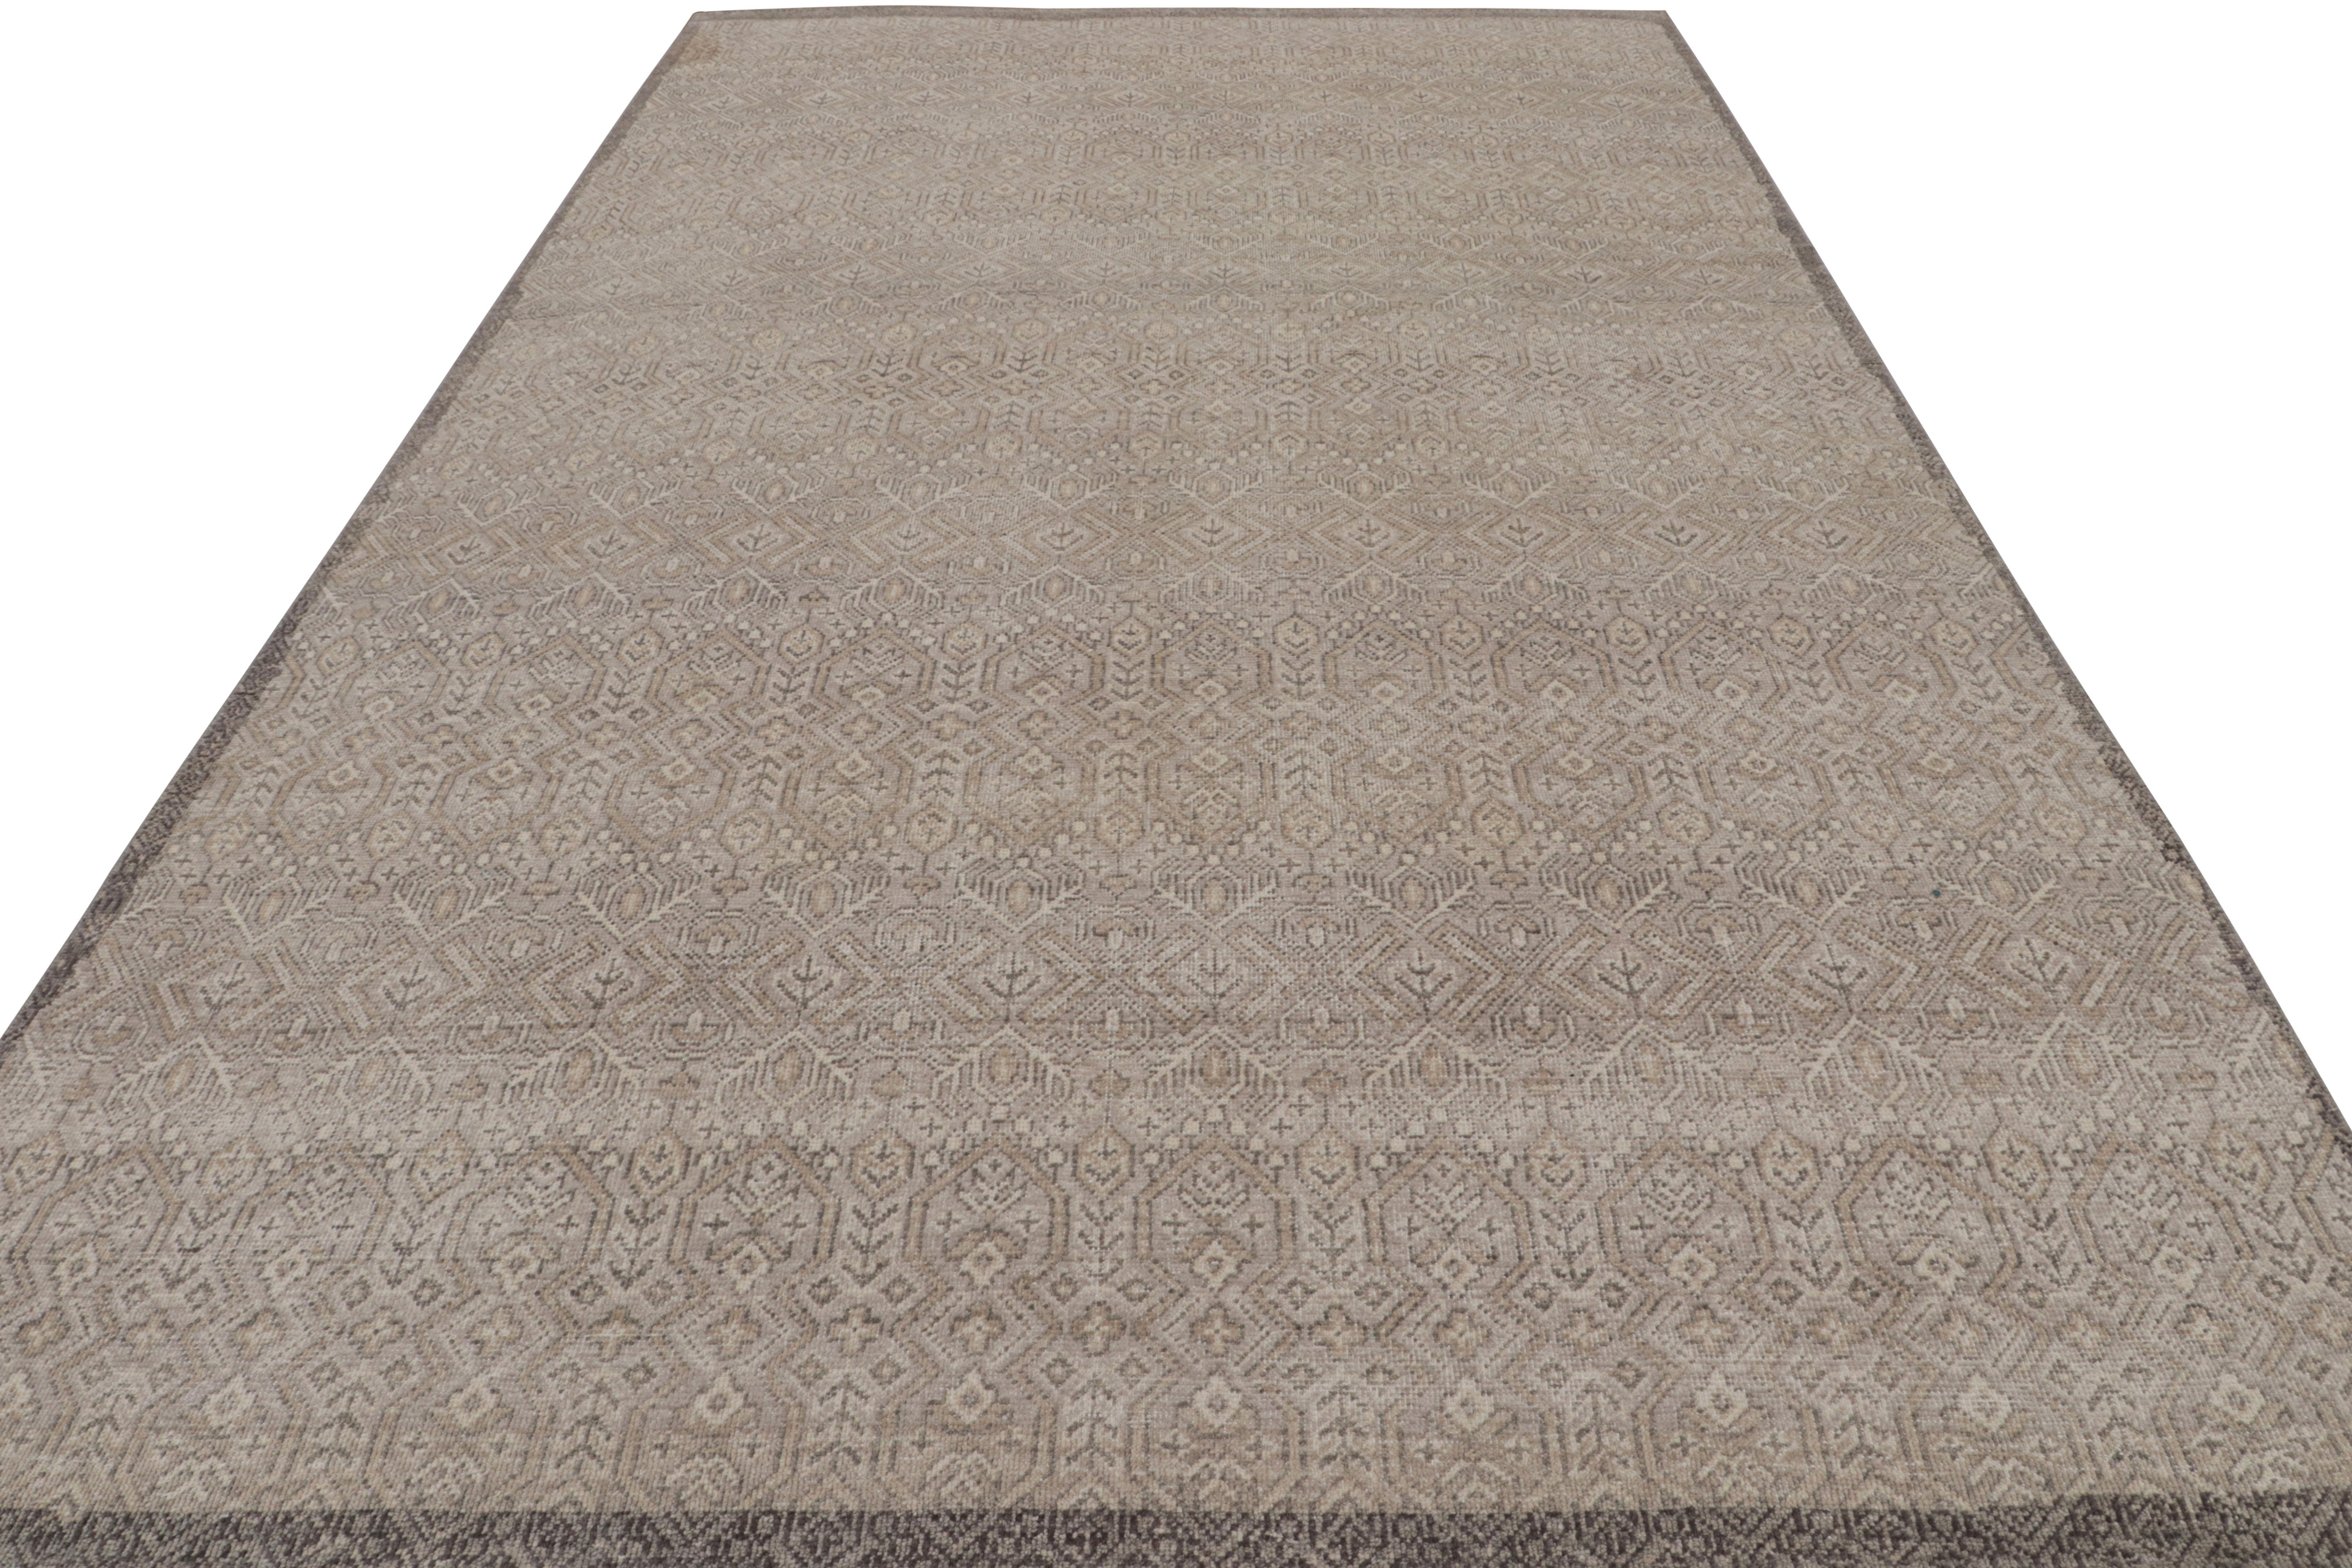 Modern Rug & Kilim’s Contemporary Rug in Beige, Gray and Blue Geometric Patterns For Sale